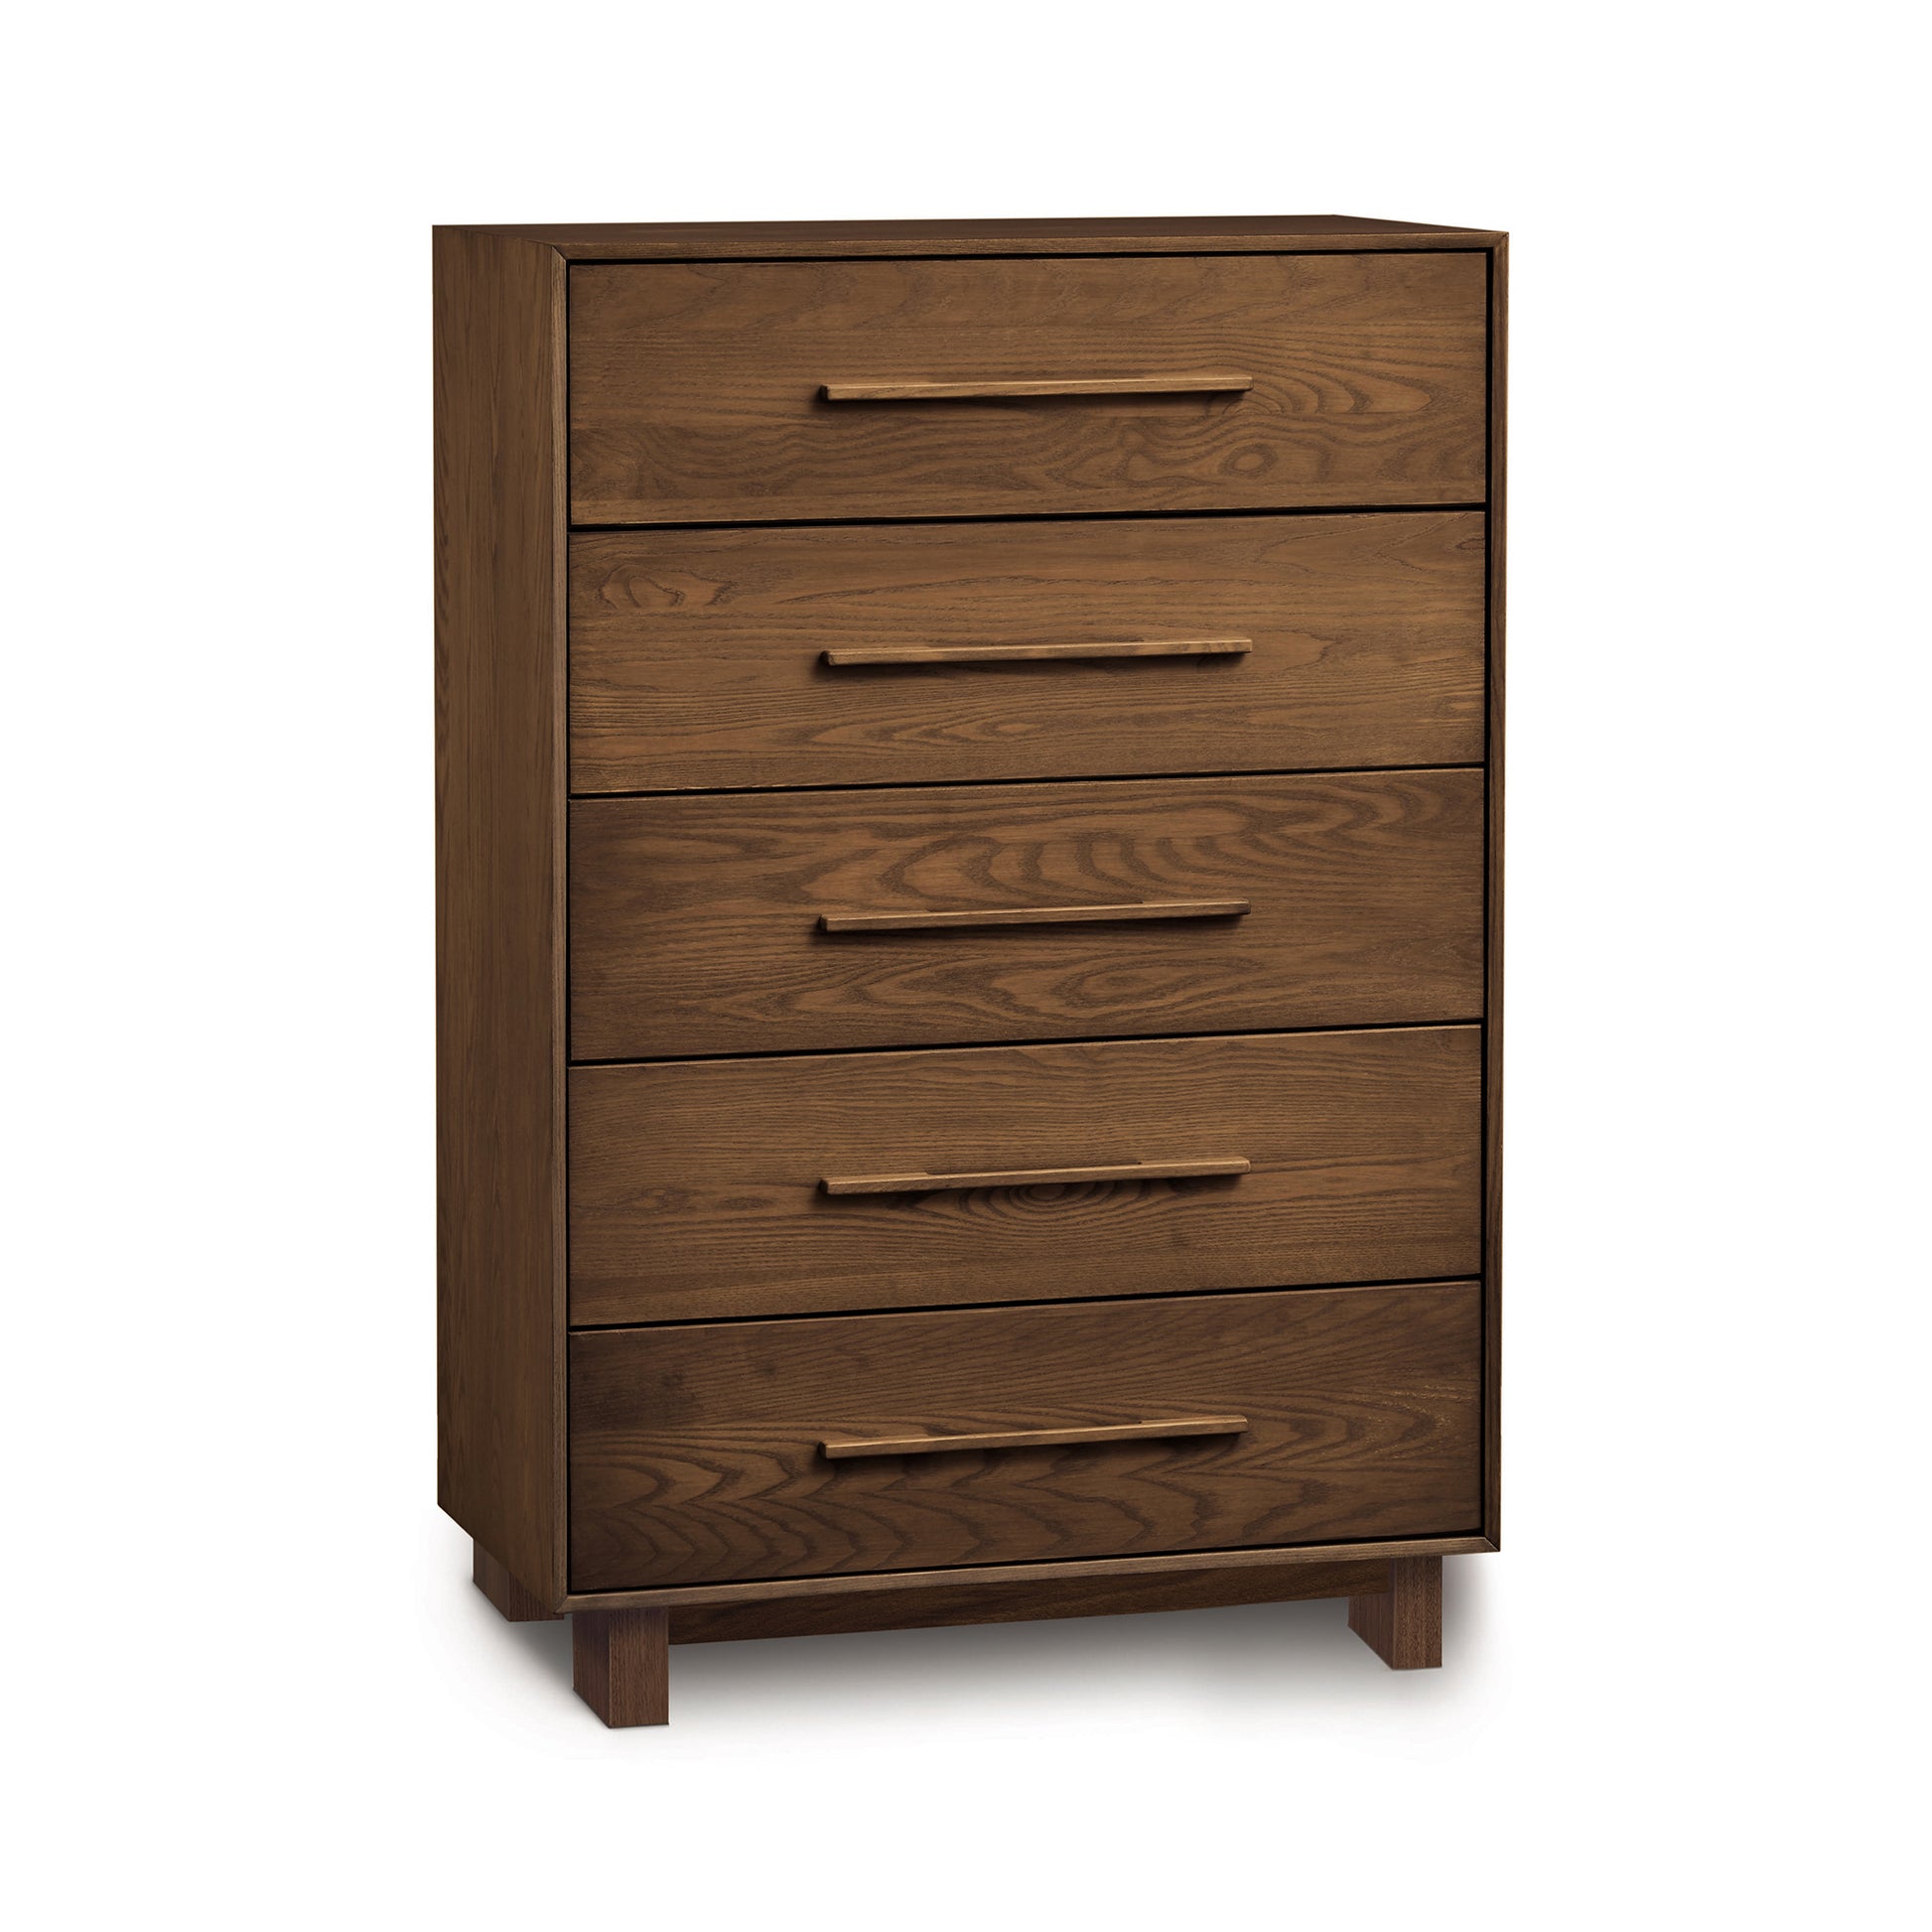 A Copeland Furniture Sloane 5-Drawer Wide Chest providing ample storage space for bedroom furniture, set against a clean white background.